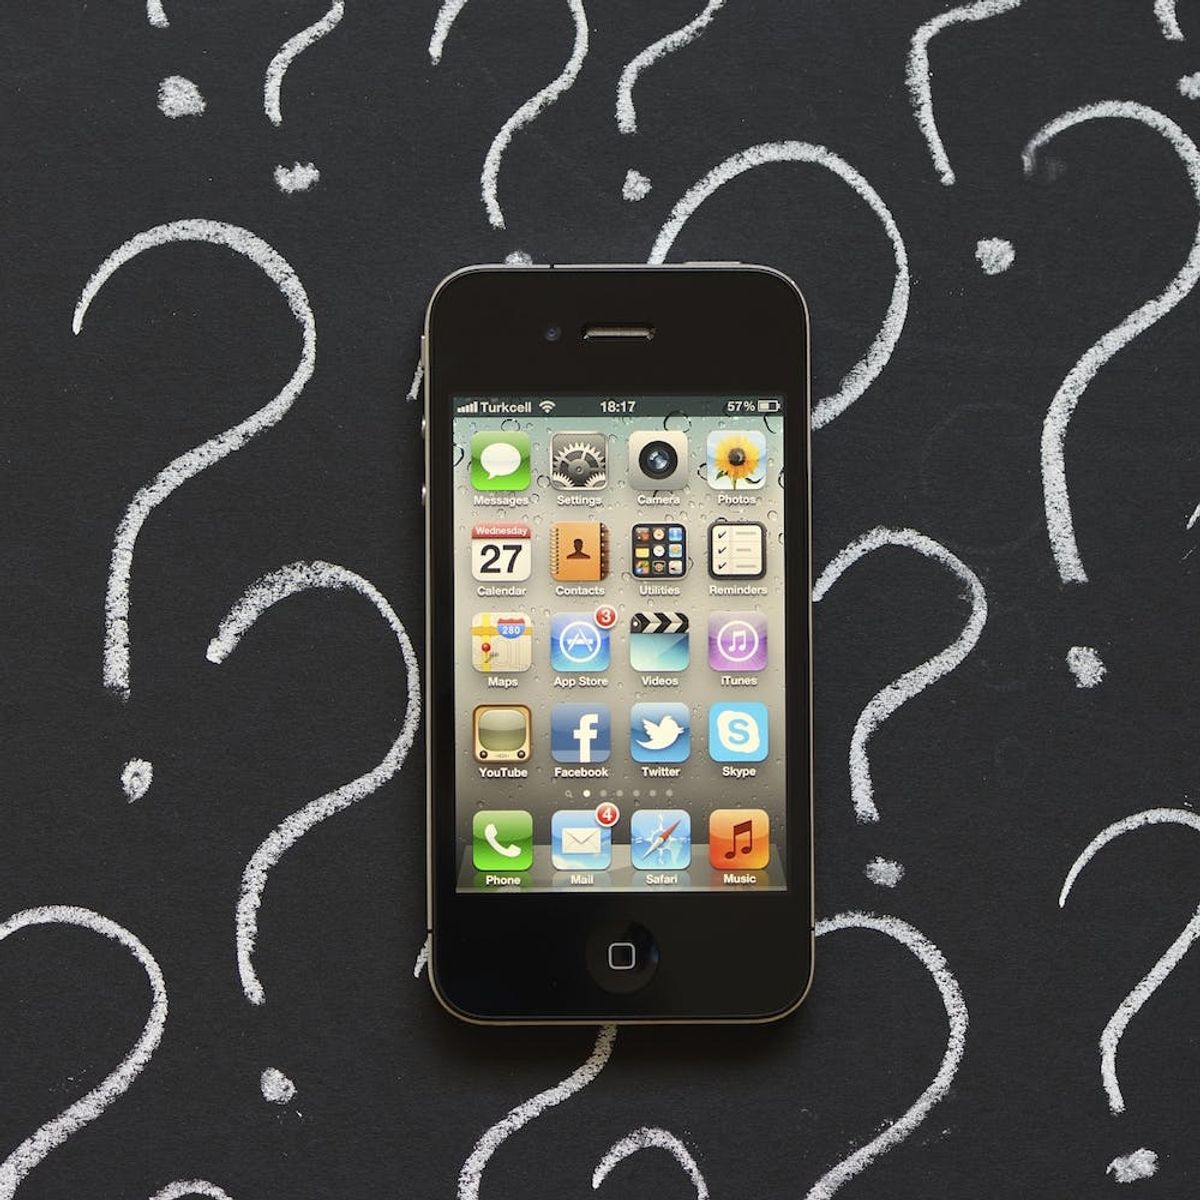 3 Insanely Helpful Tips to Help You Find Your Lost iPhone